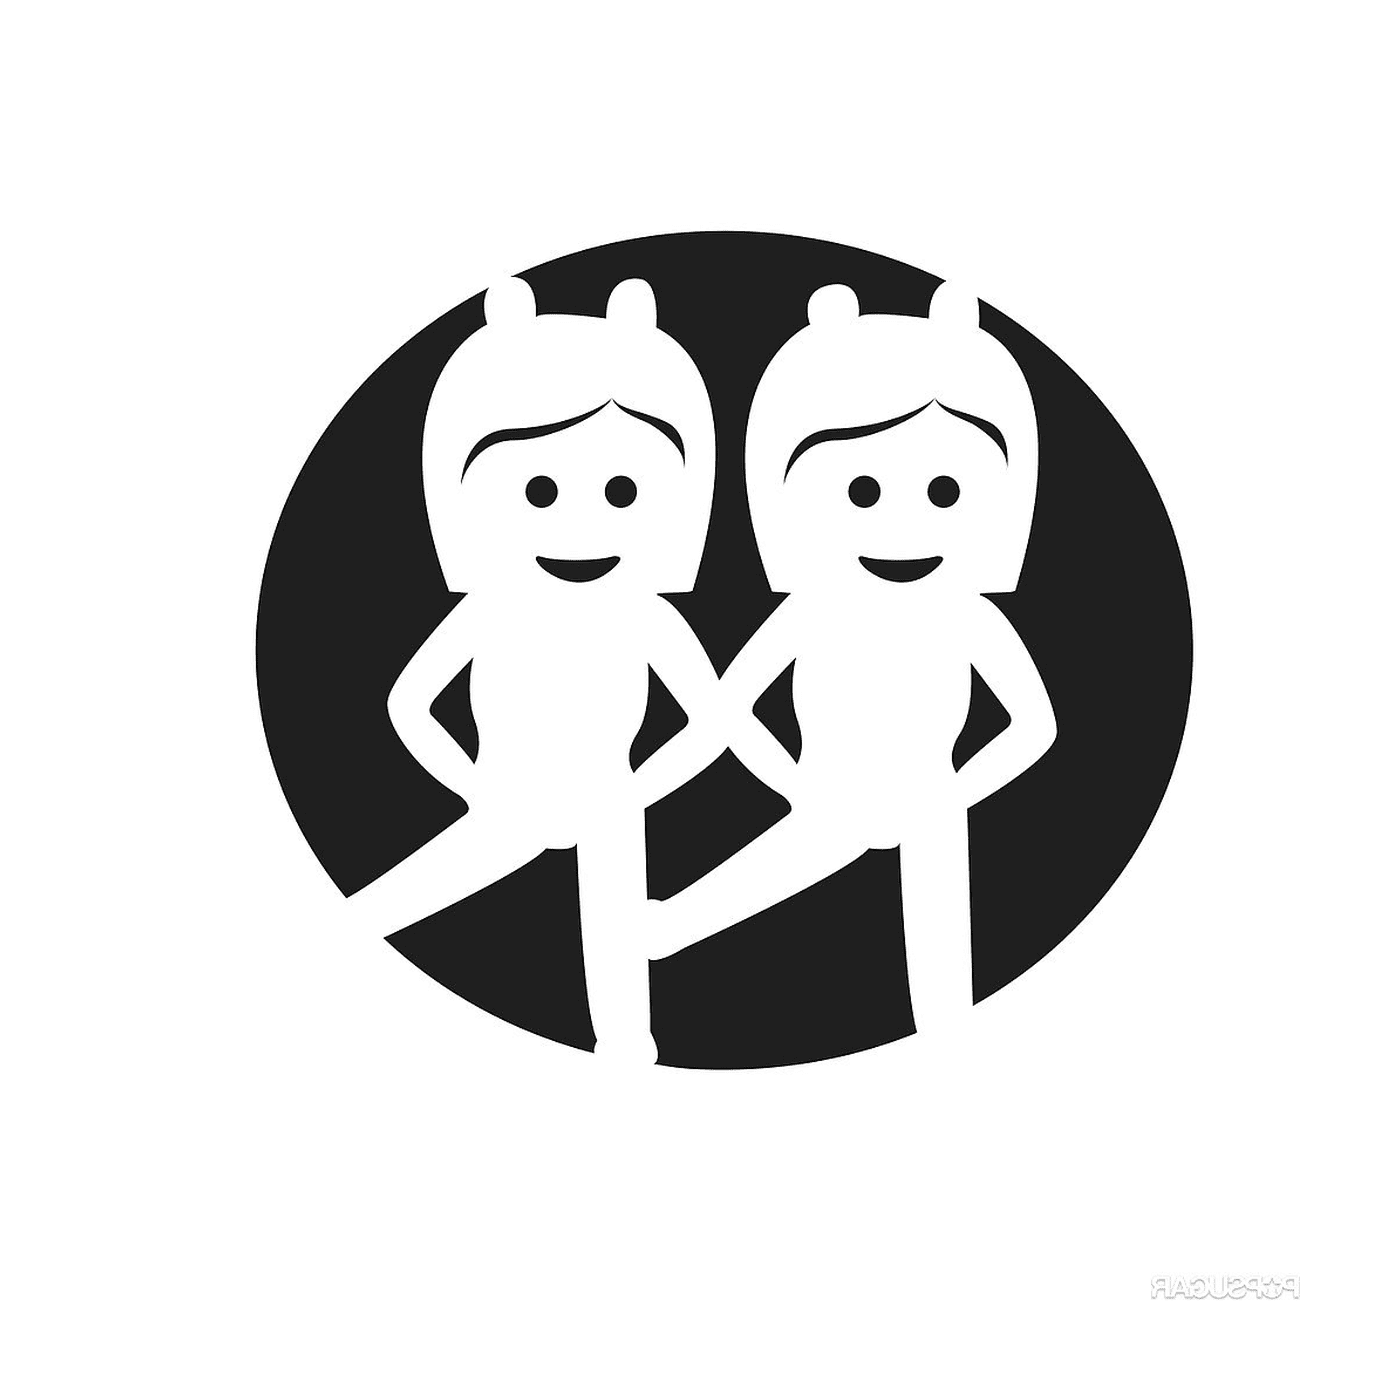  Two people holding hands 